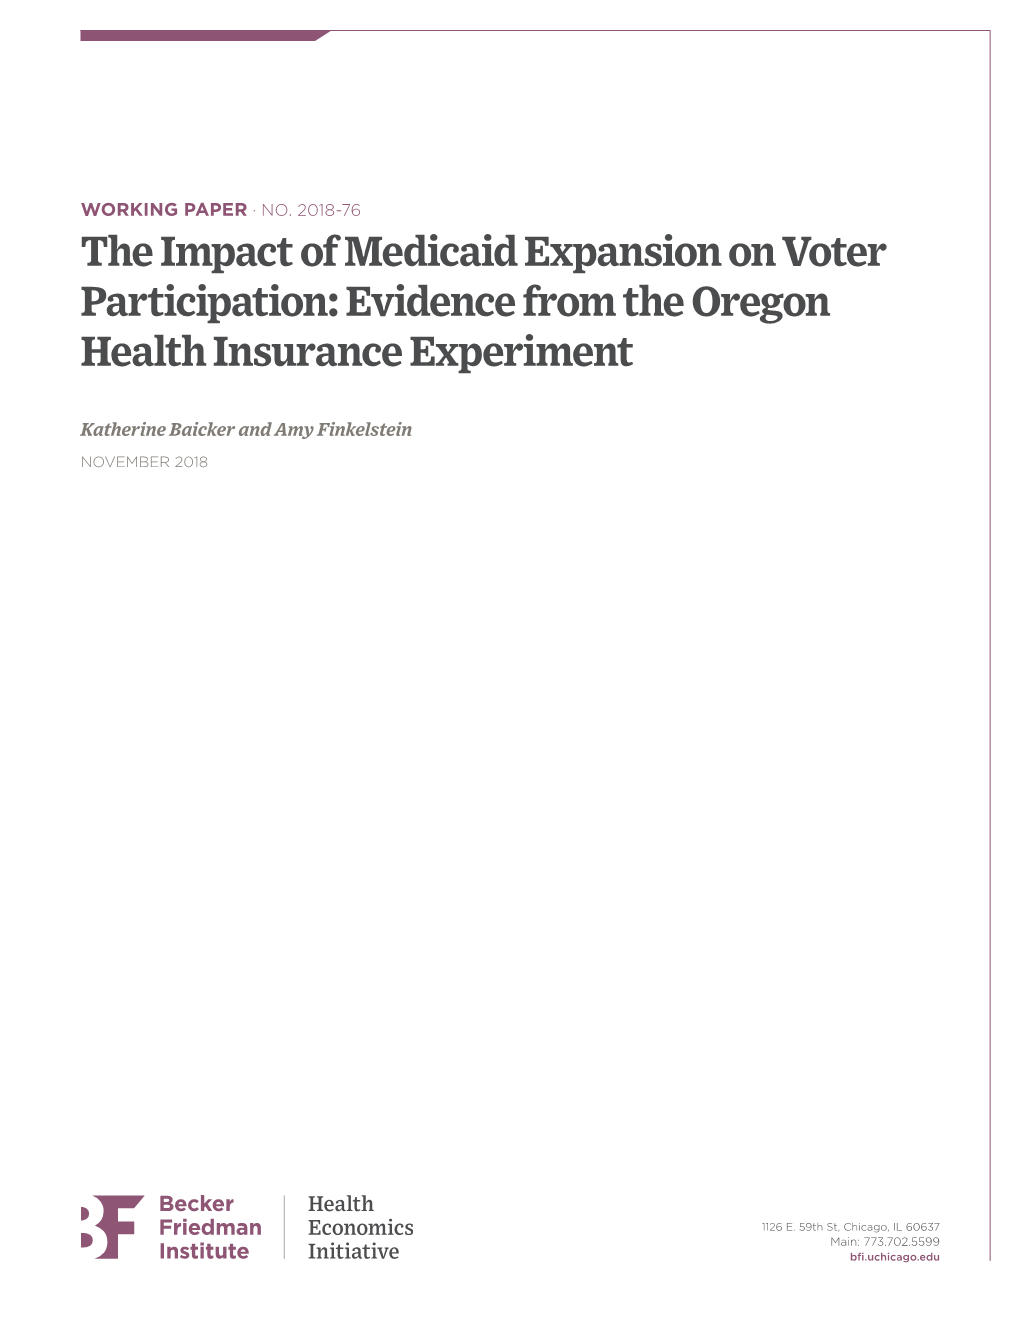 The Impact of Medicaid Expansion on Voter Participation: Evidence from the Oregon Health Insurance Experiment